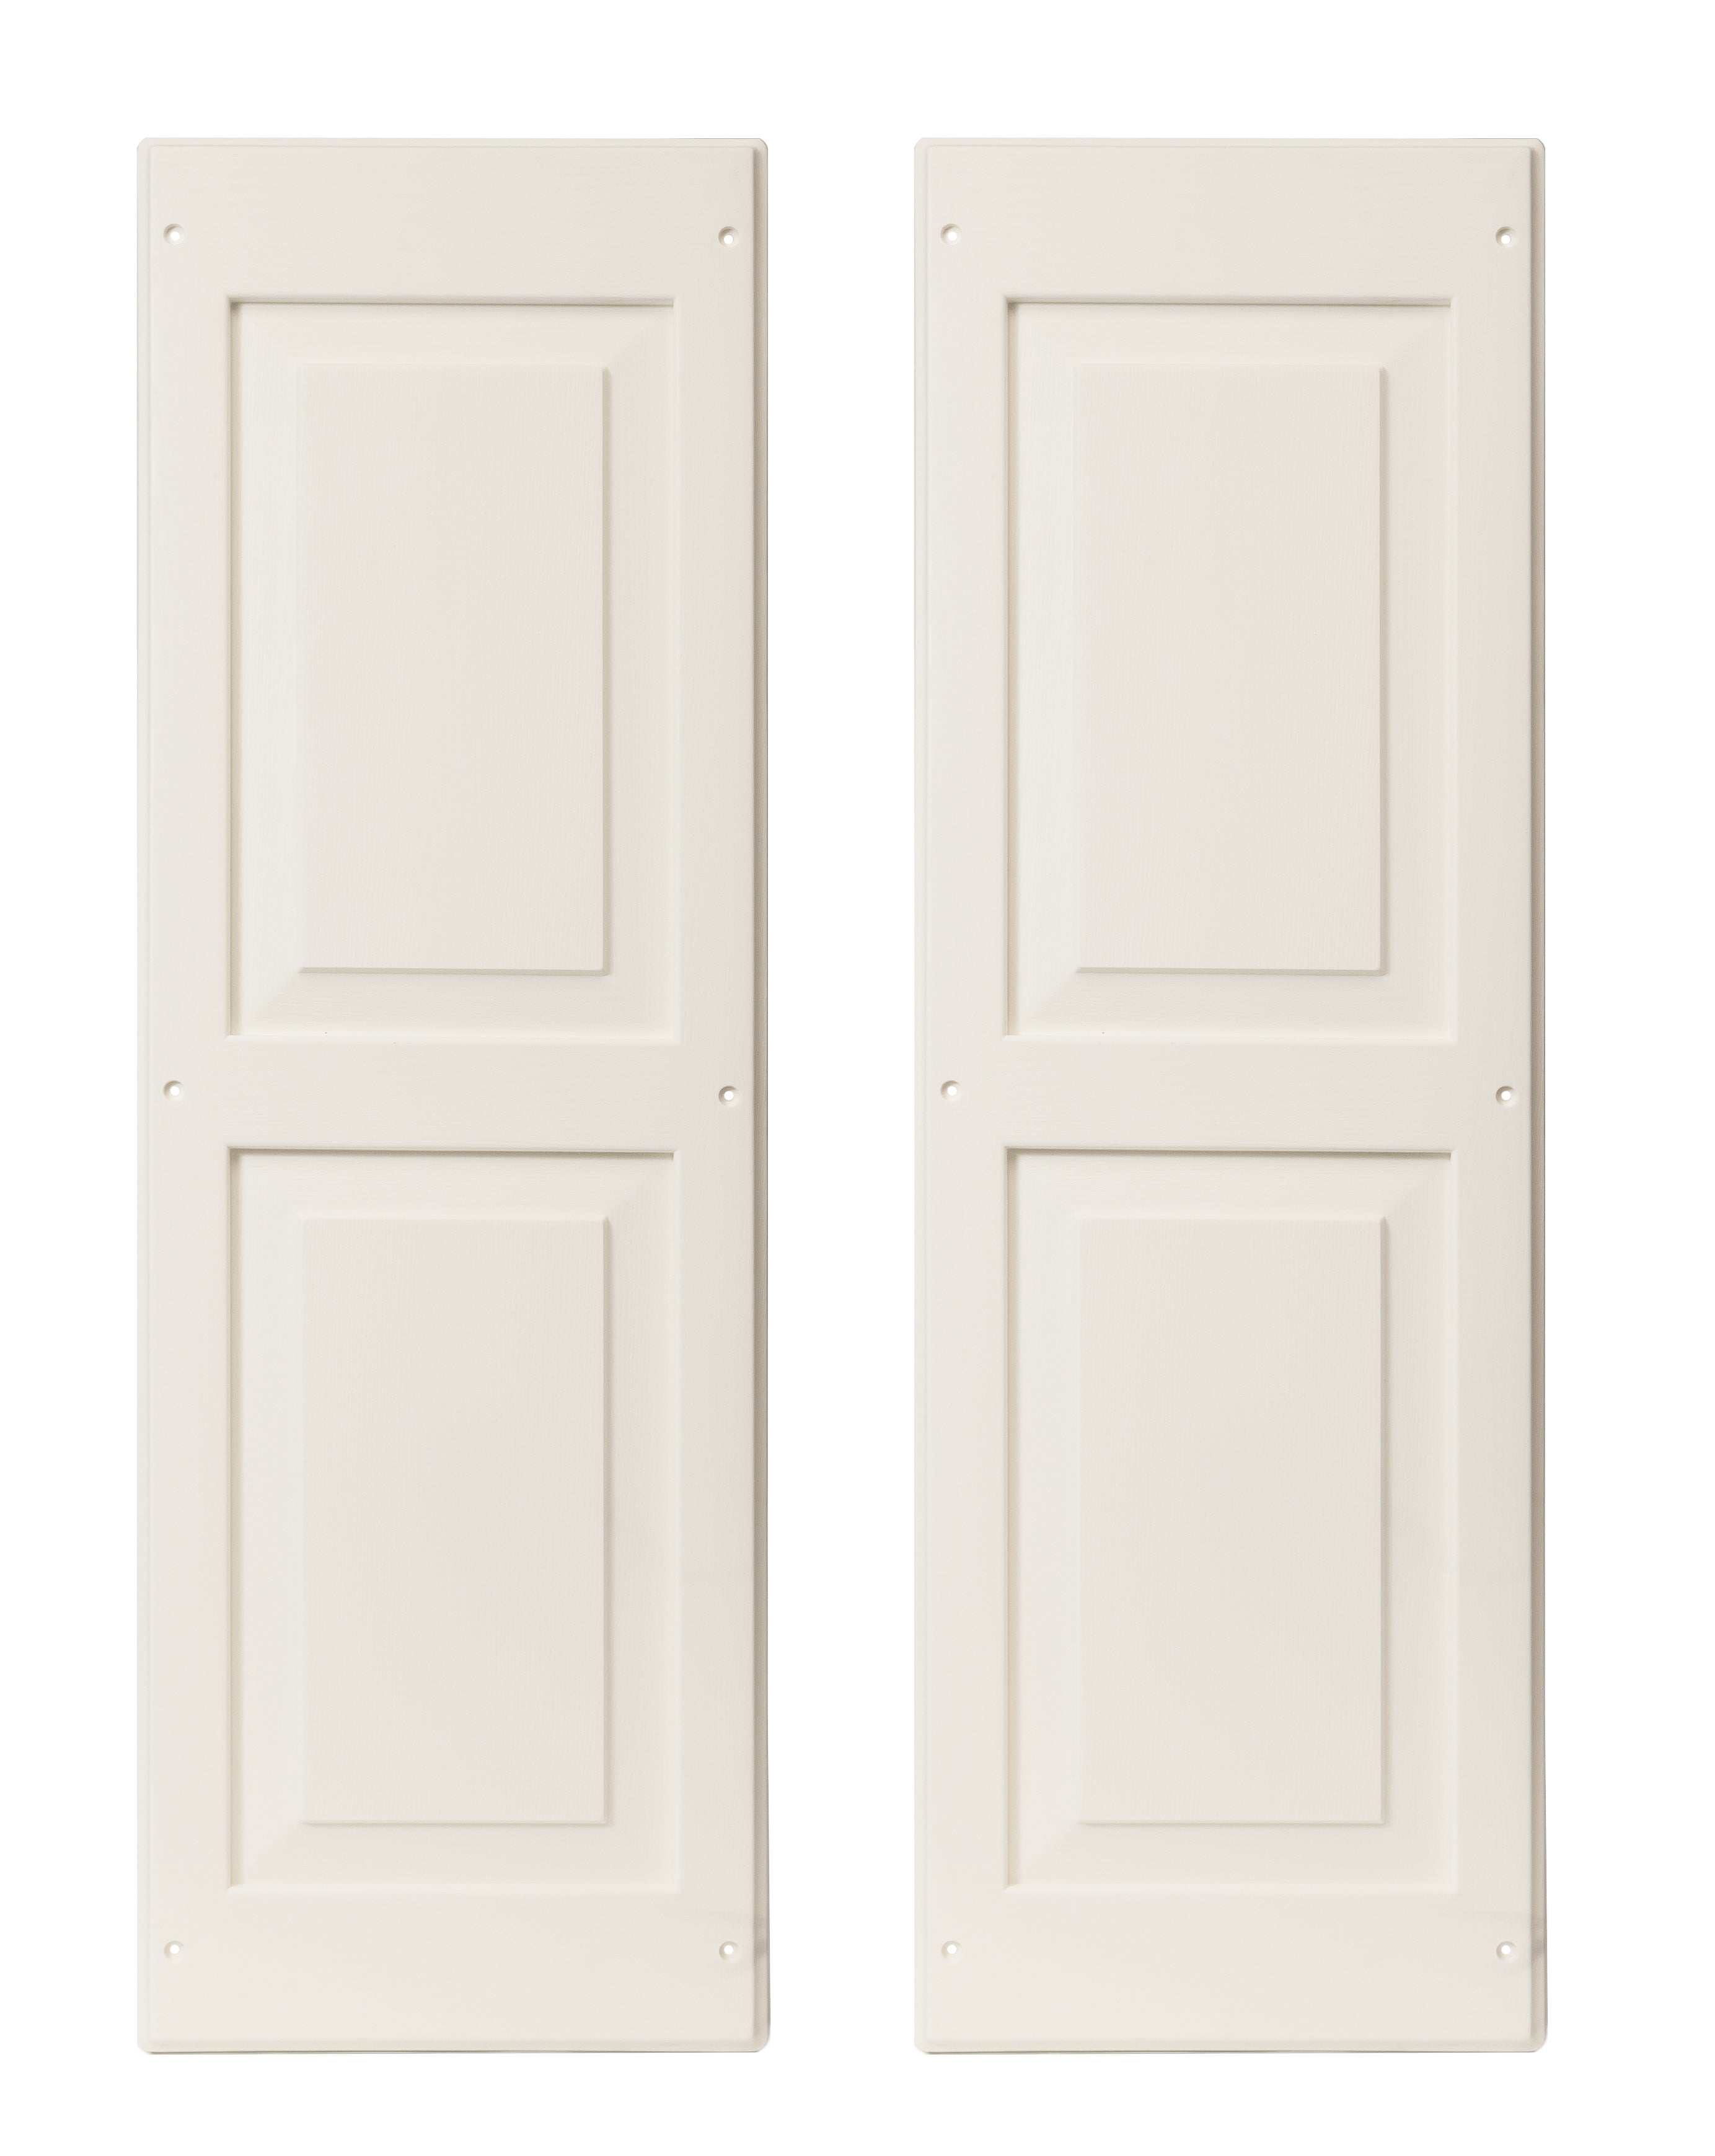 Pair of 12" W x 36" H Raised Panel Paintable Shutters for Sheds, Playhouses, and MORE 